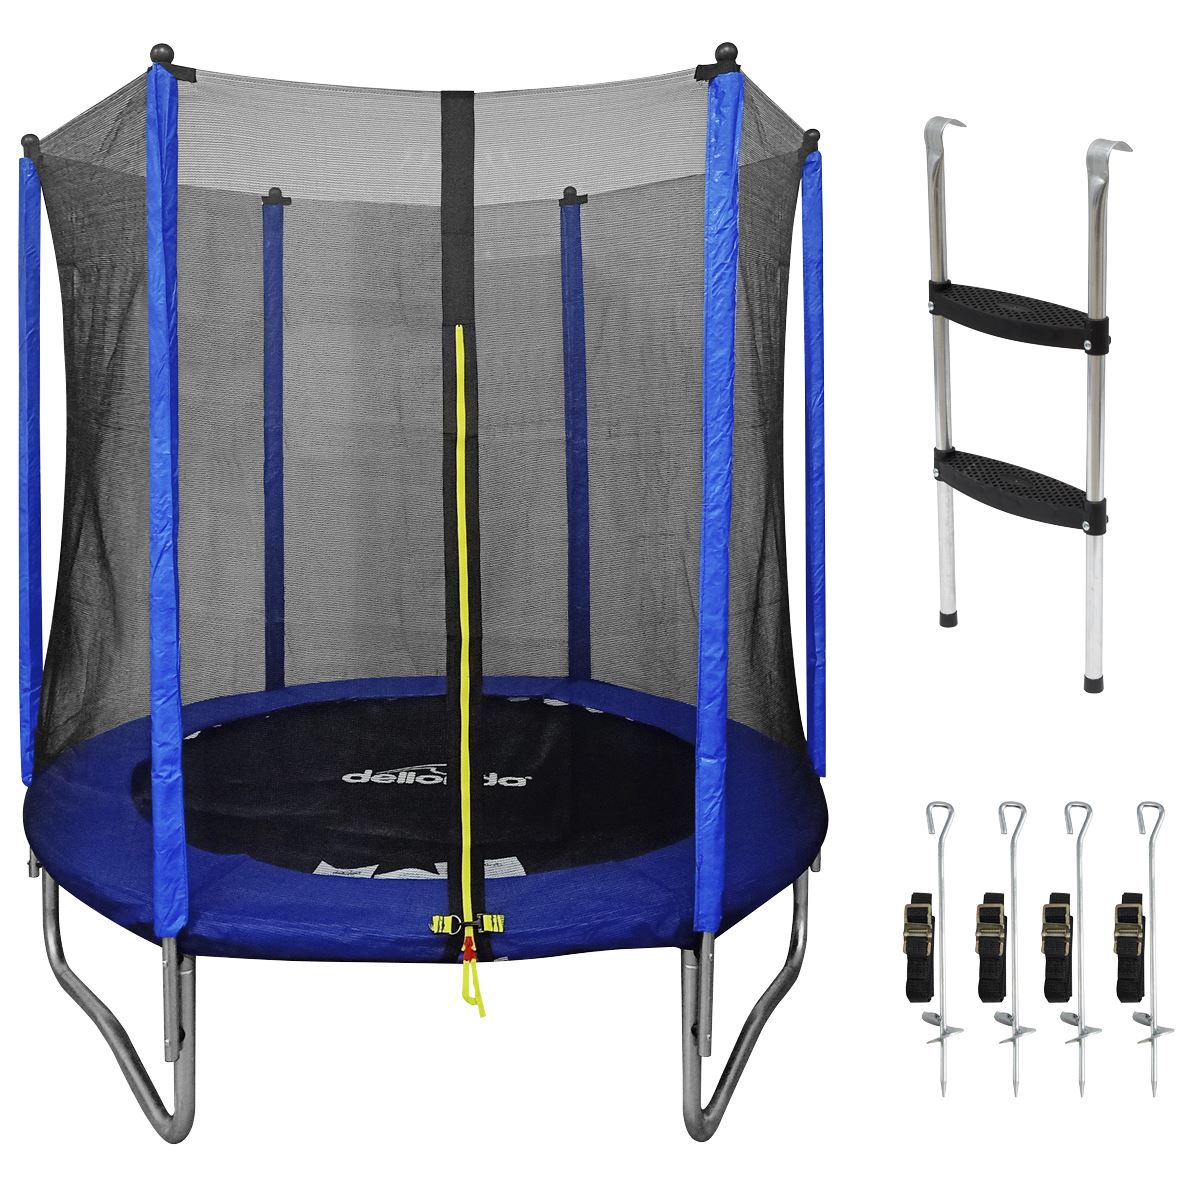 Dellonda 6ft Heavy Duty Outdoor Trampoline with Safety Net, Anchors and Ladder